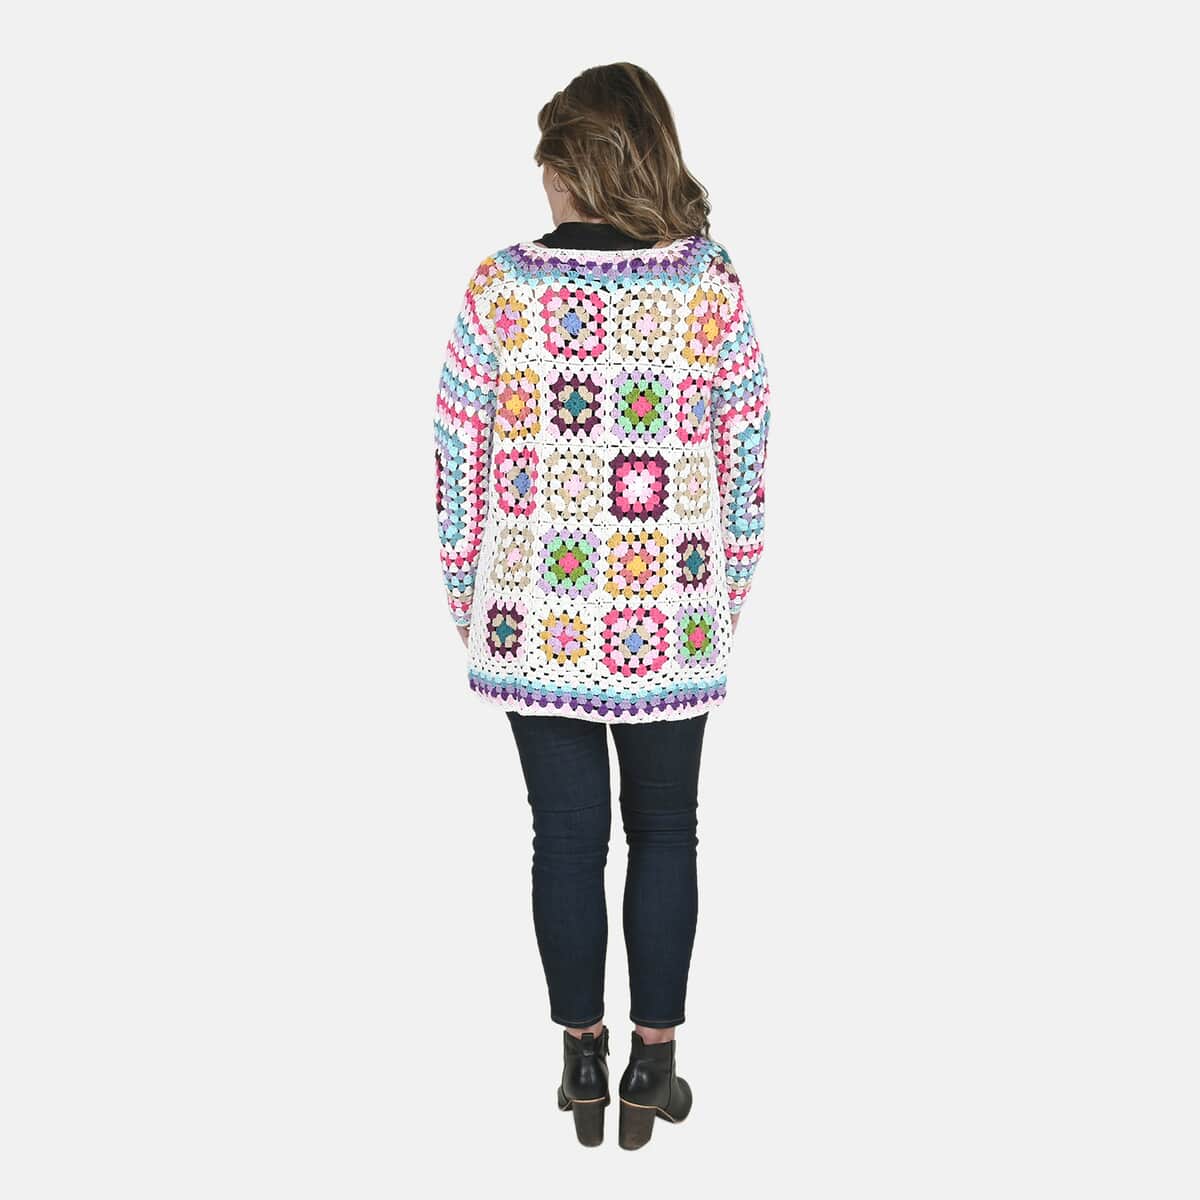 PASSAGE 100% Cotton Crochet White and Multi Color Square Cardigan for Women, Bohemian Sweater, Open Front- (S) image number 1